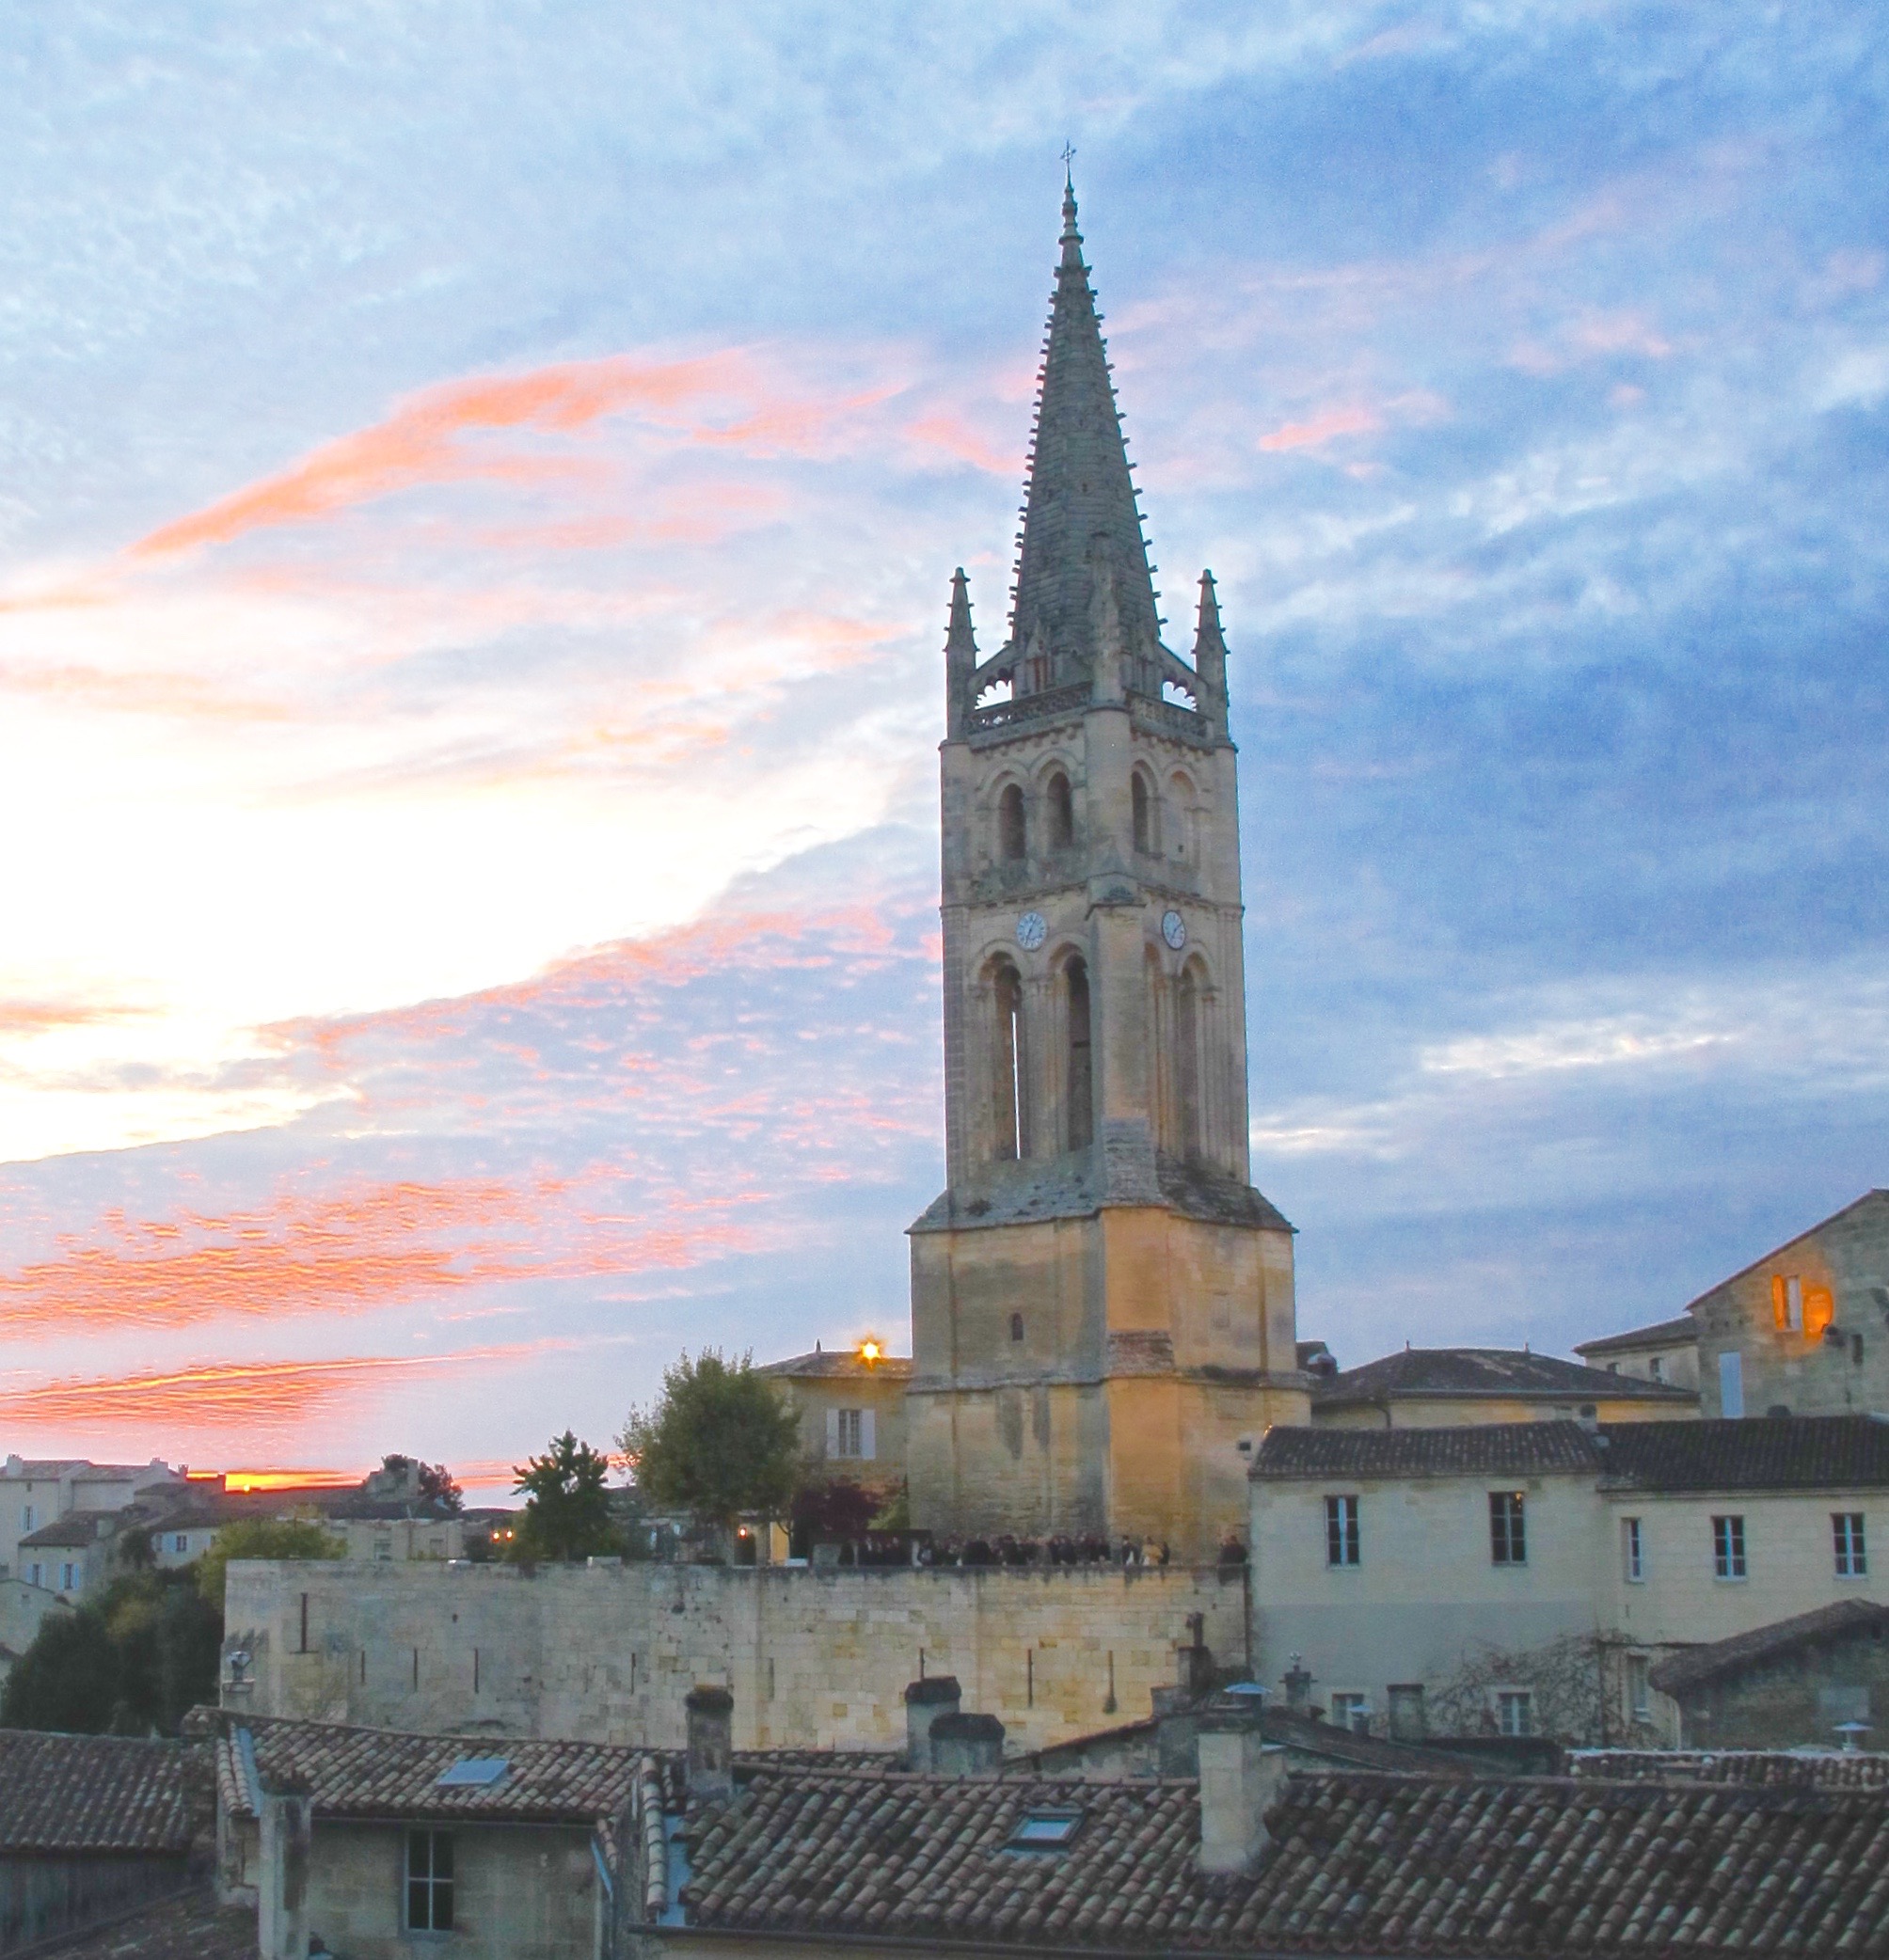 Charming village of Saint-Émilion, with its narrow streets and Monolithic Church. Photo by Marla Norman.